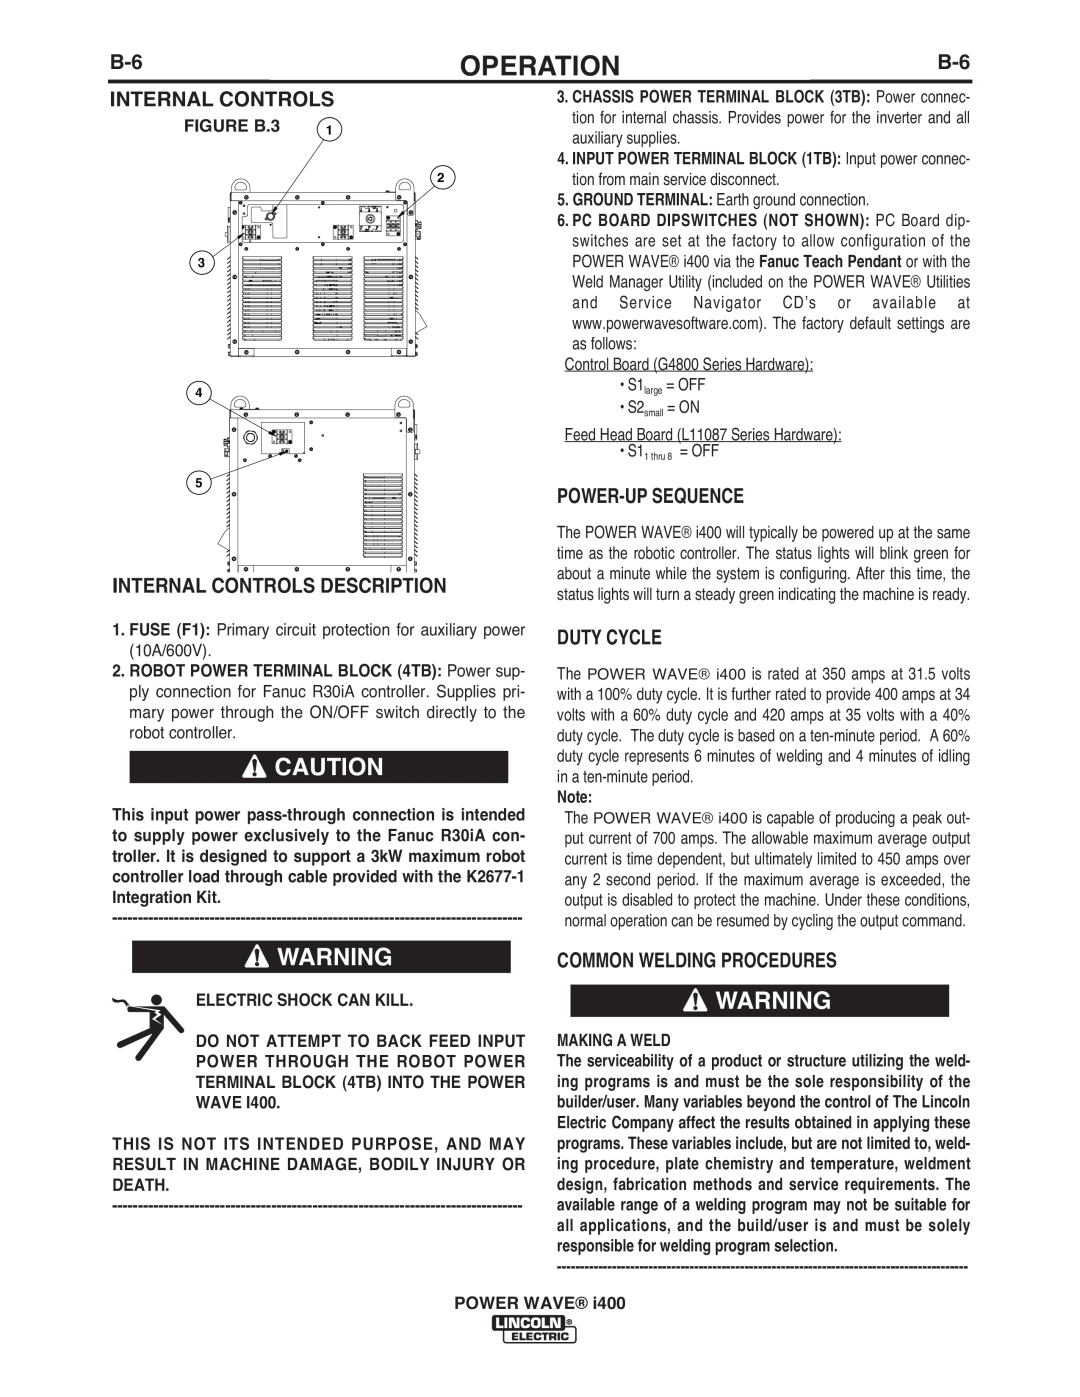 Lincoln Electric IM986 manual Internal Controls Description, Power-Up Sequence, Duty Cycle, Common Welding Procedures 